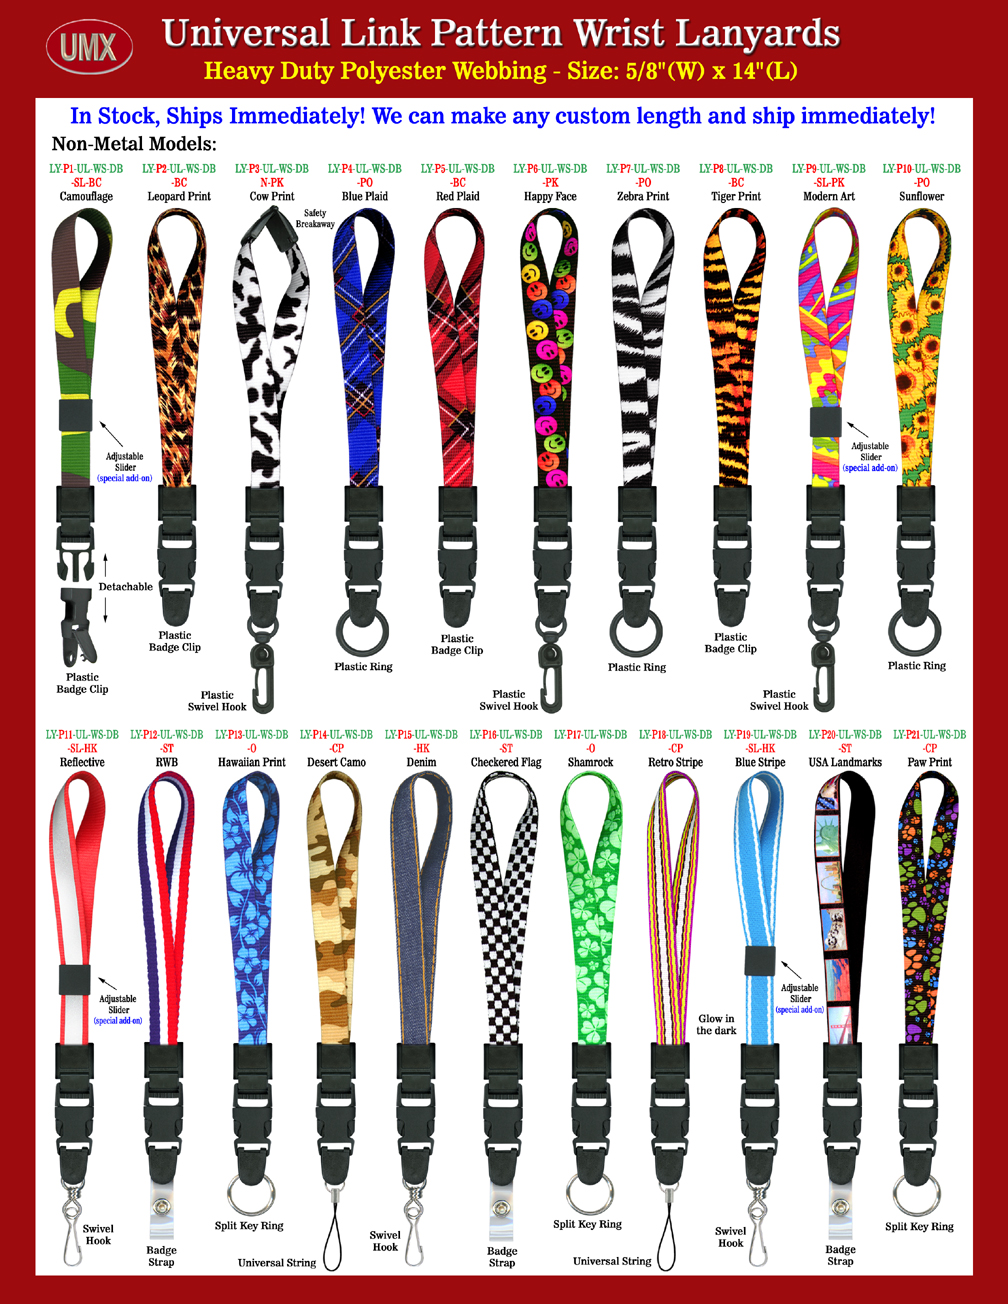 Universal Link: 5/8" Pre-Printed Theme Quick Release Wrist Lanyards